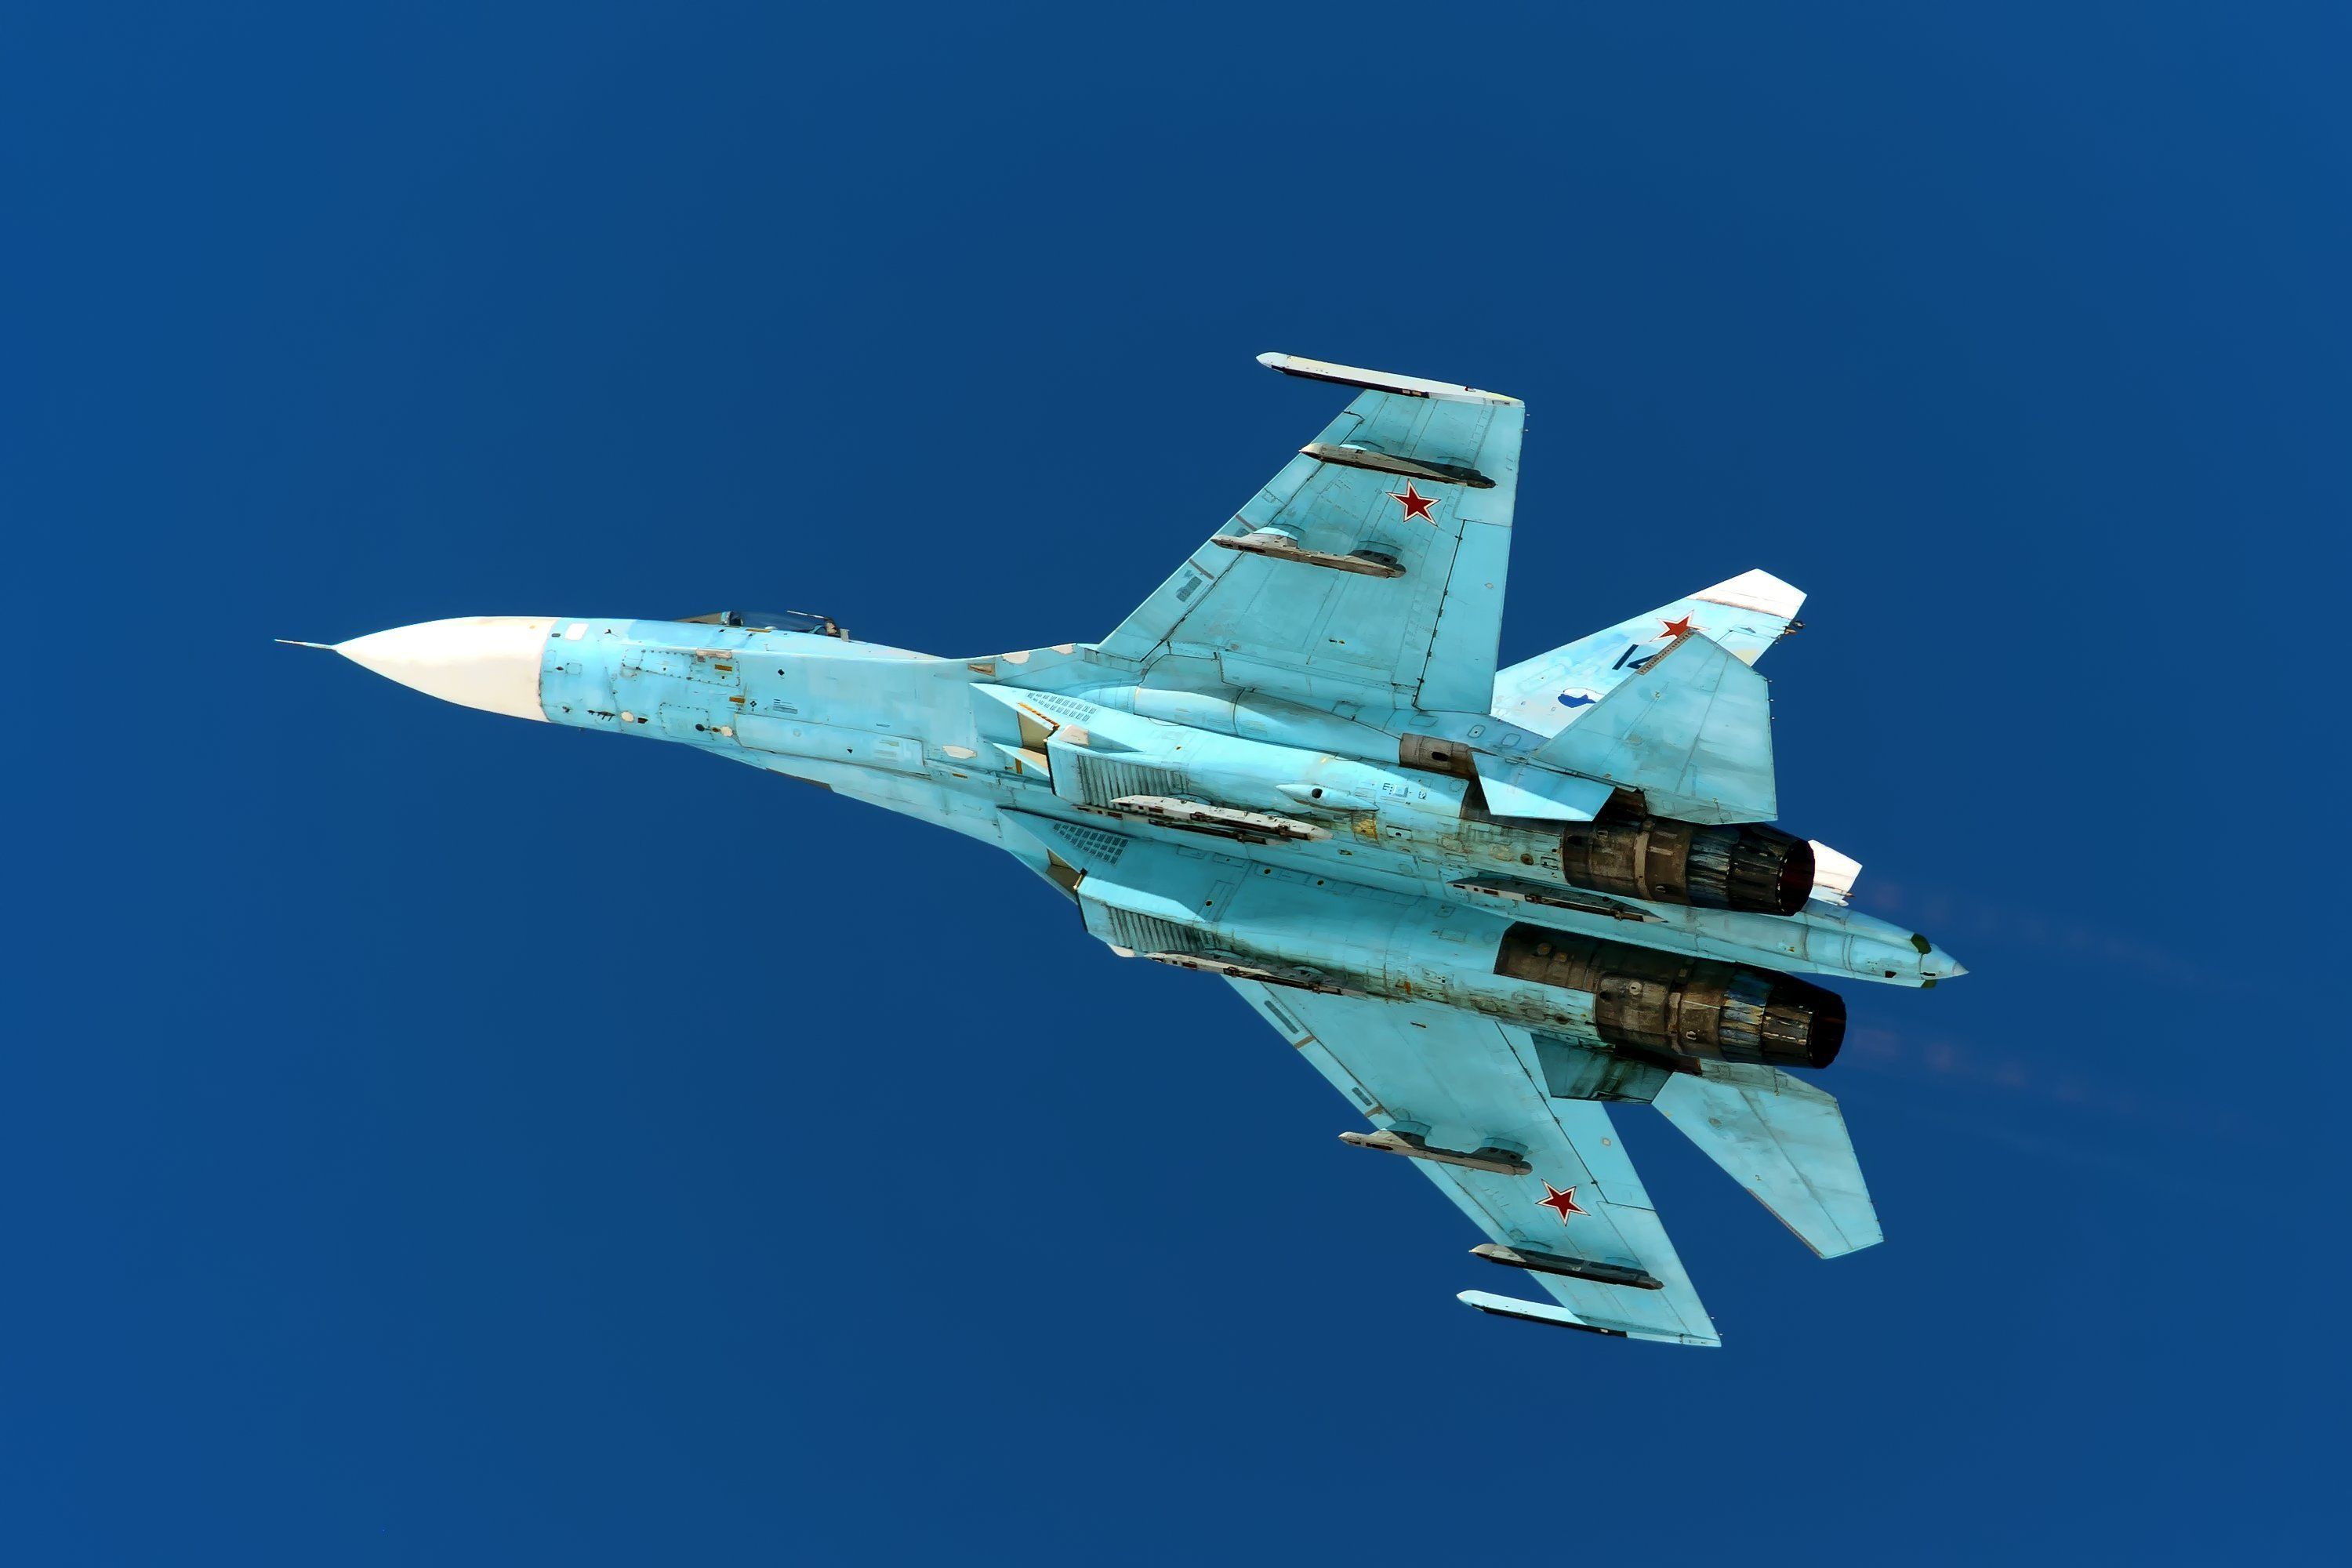 shutterstock_419160238 - MOSCOW REGION, RUSSIA - MARCH 20, 2010: Russian Air Force Sukhoi Su-27 